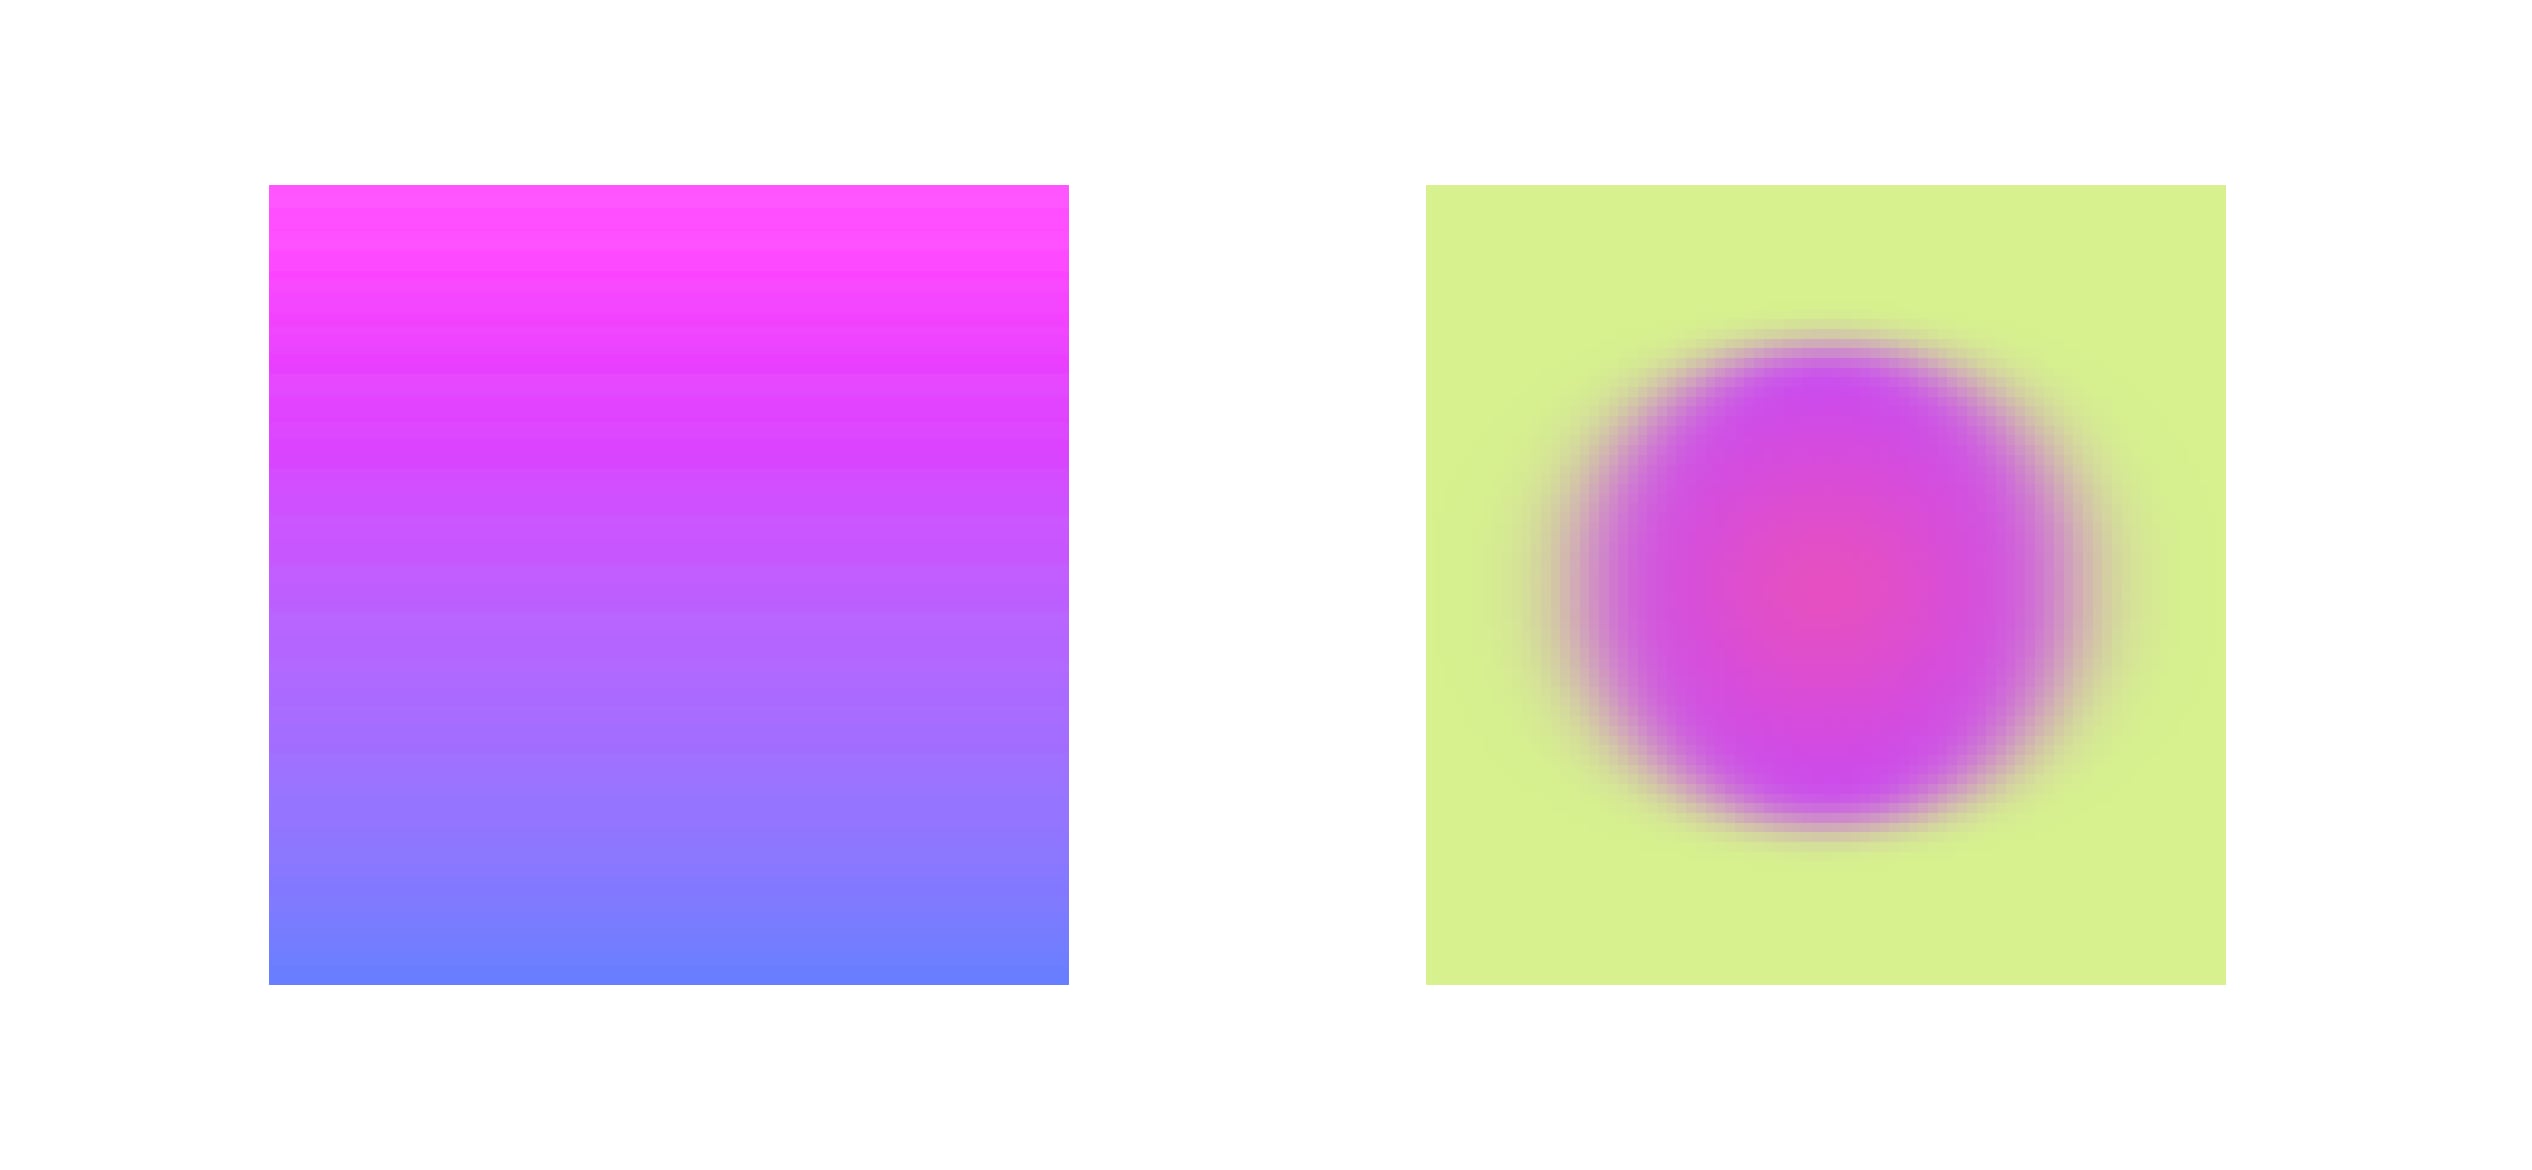 Banding and pixelation. Banding means there&rsquo;s no smooth transition between a gradient, pixelation means blocks instead of smooth lines